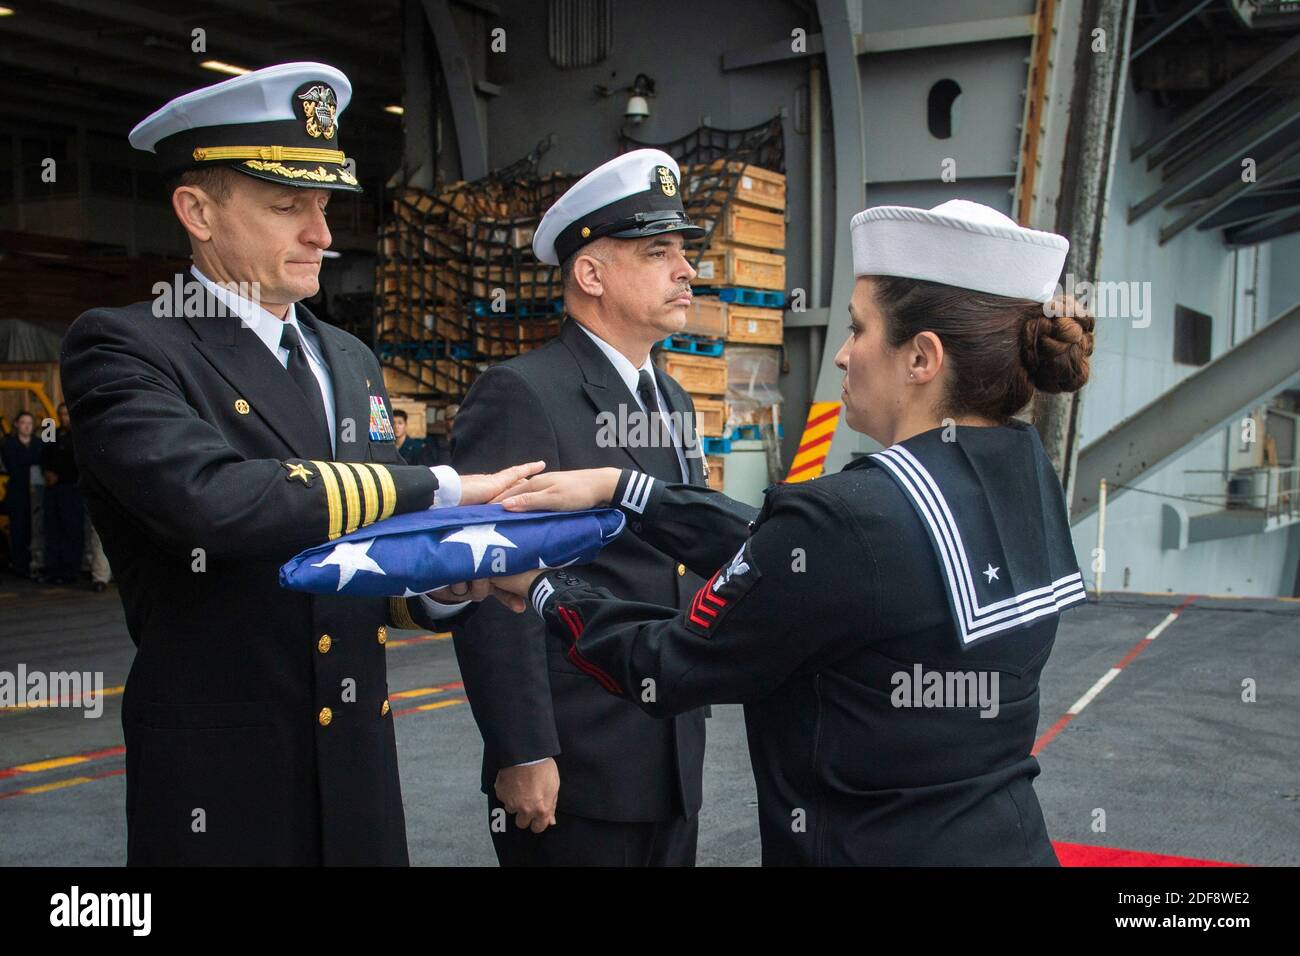 Handout file photo dated January 20, 2020 of Capt. Brett Crozier, left, commanding officer of the aircraft carrier USS Theodore Roosevelt (CVN 71), receives the national ensign in the Pacific Ocean. Brett Crozier, captain of nuclear aircraft carrier Theodore Roosevelt, with more than 100 sailors infected with the coronavirus pleaded Monday with U.S. Navy officials for resources to allow isolation of his entire crew and avoid possible deaths in a situation he described as quickly deteriorating. Photo by US Navy via ABACAPRESS.COM Stock Photo